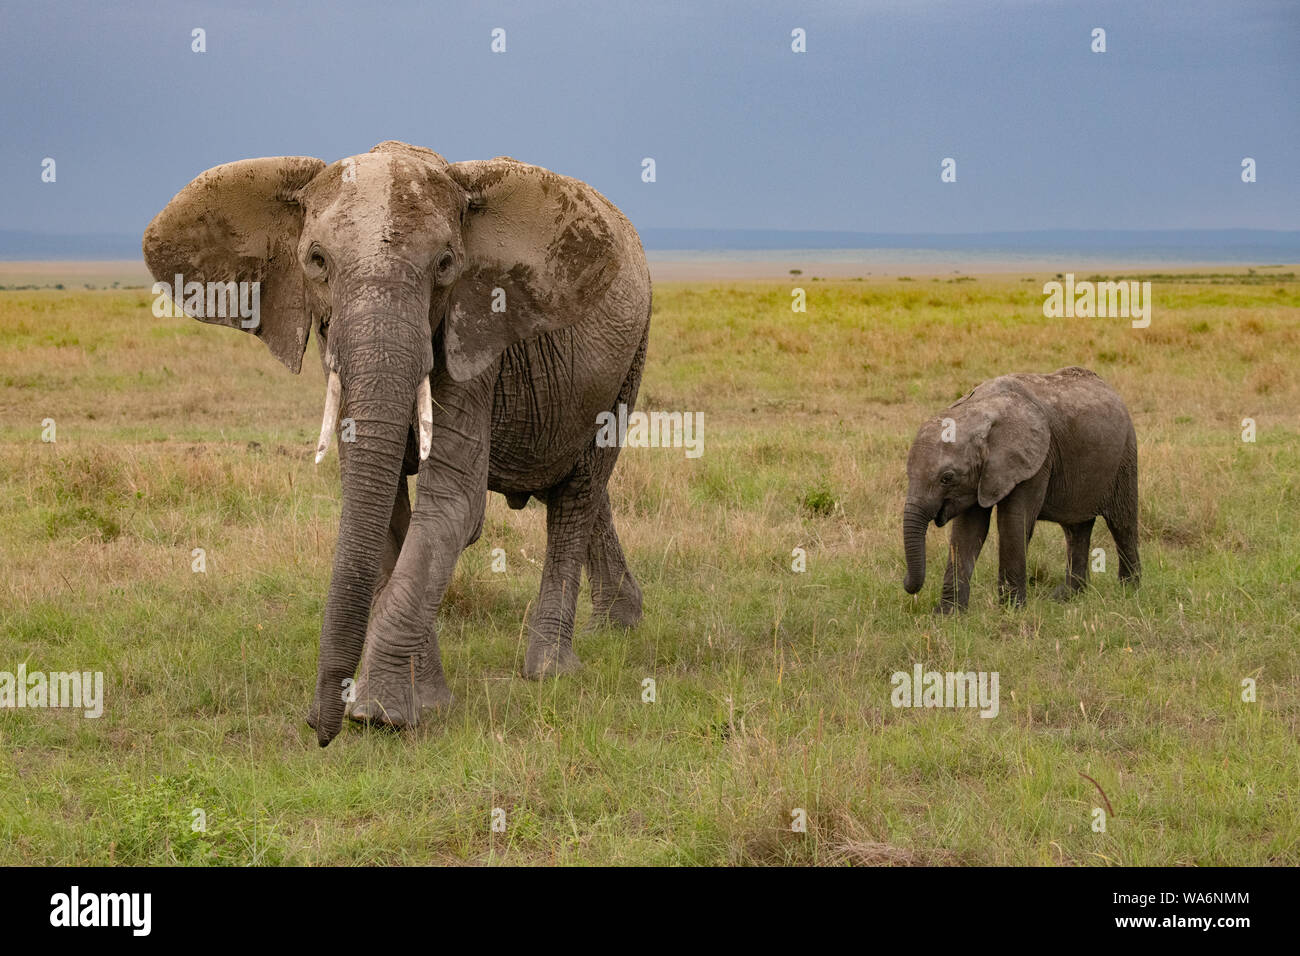 Mother elephant leading its young in short grass Stock Photo